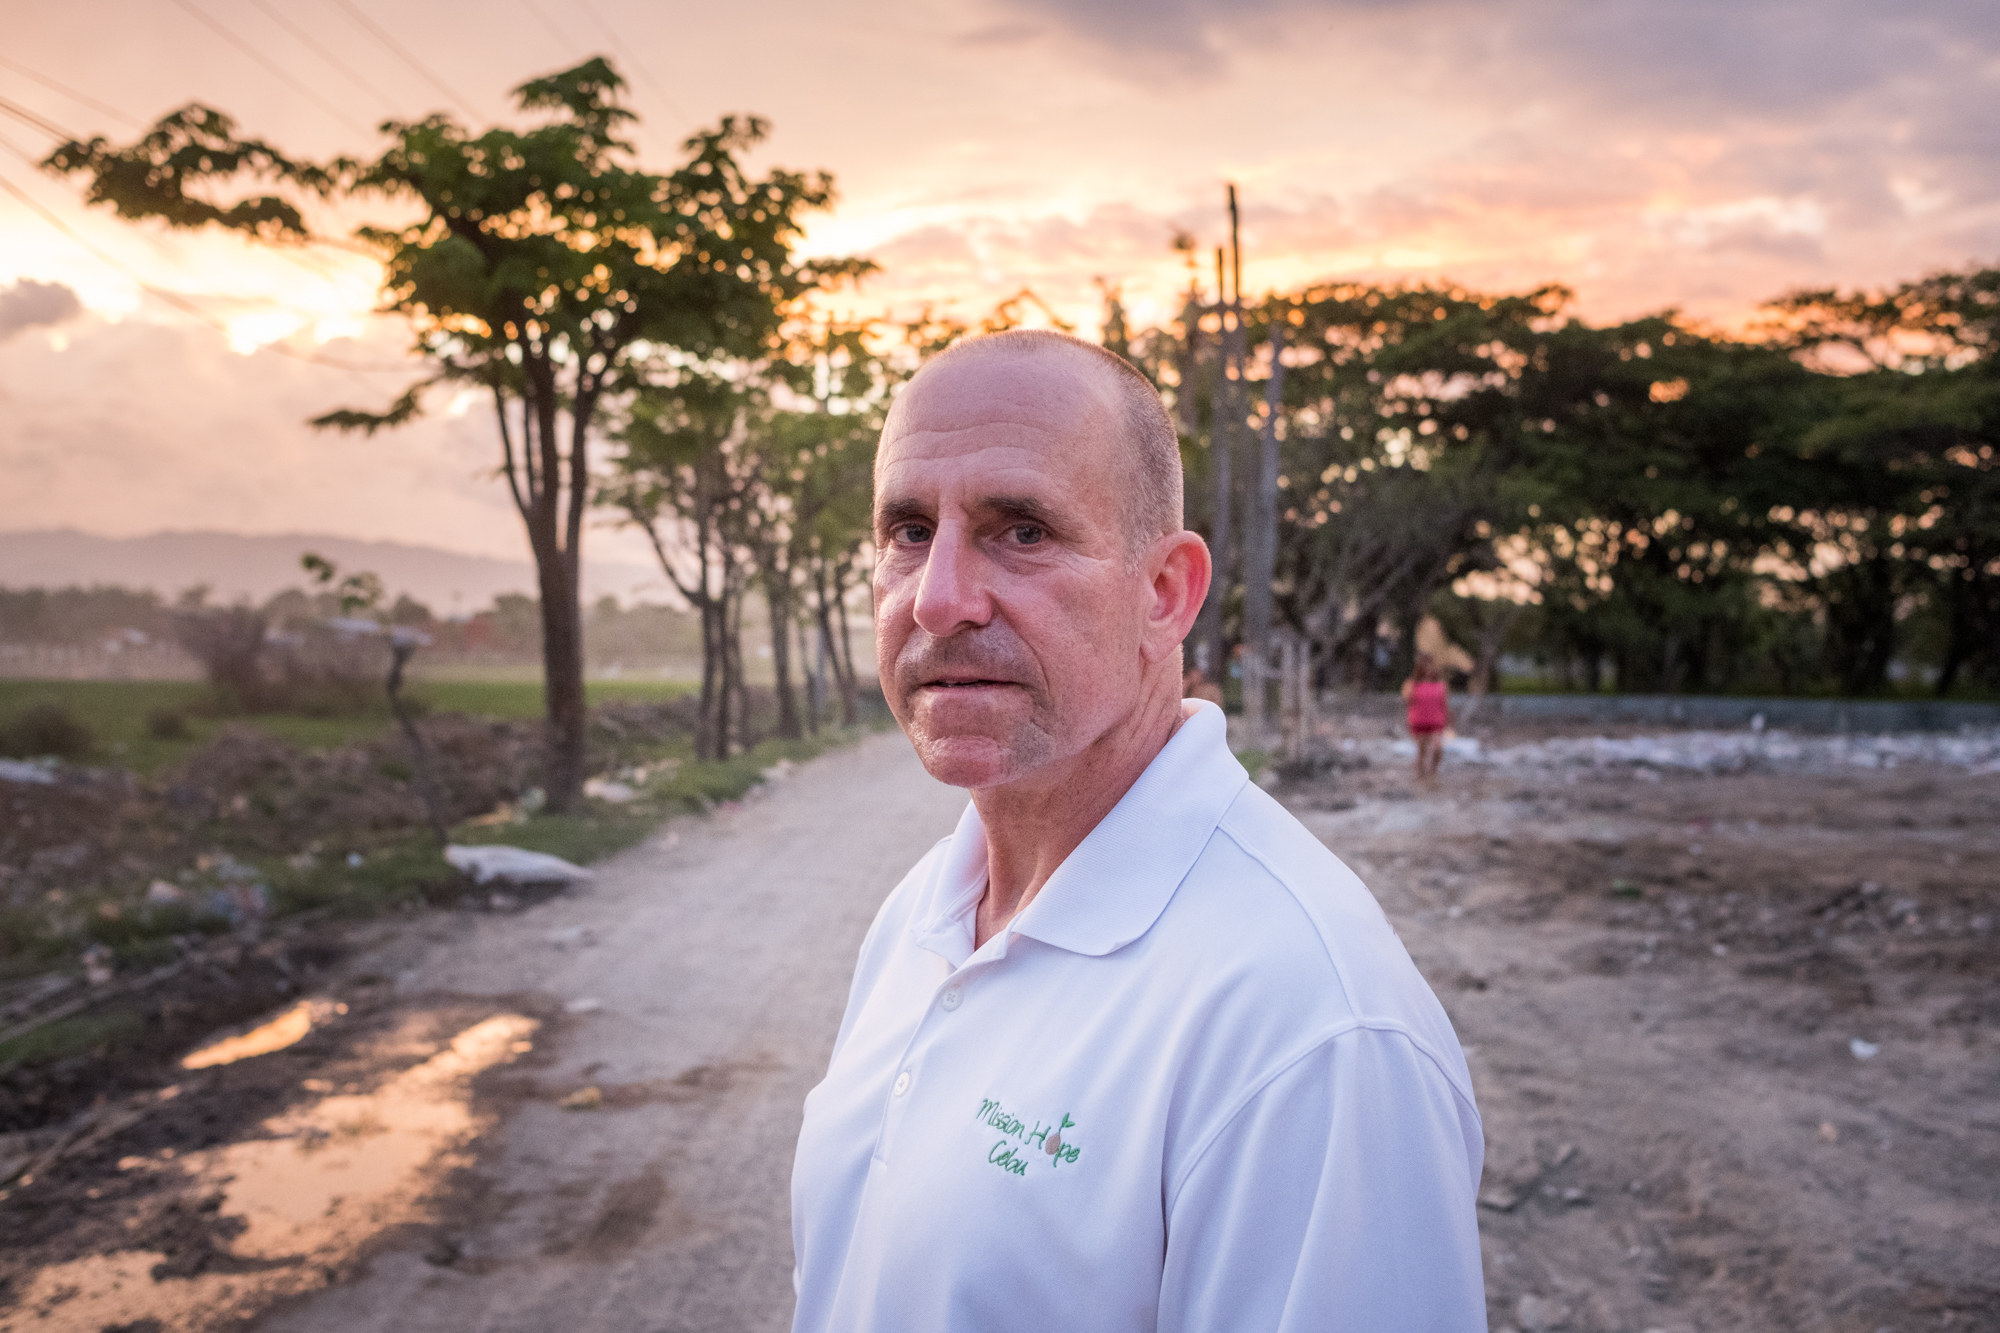  Frank Becker, a Hilton Team Member and Thrive Sabbatical winner, poses for a portrait on a road leading to the Mandaue Dump Site in Cebu, Philippines. Frank uses his personal vacation and savings to make a difference in this community. 